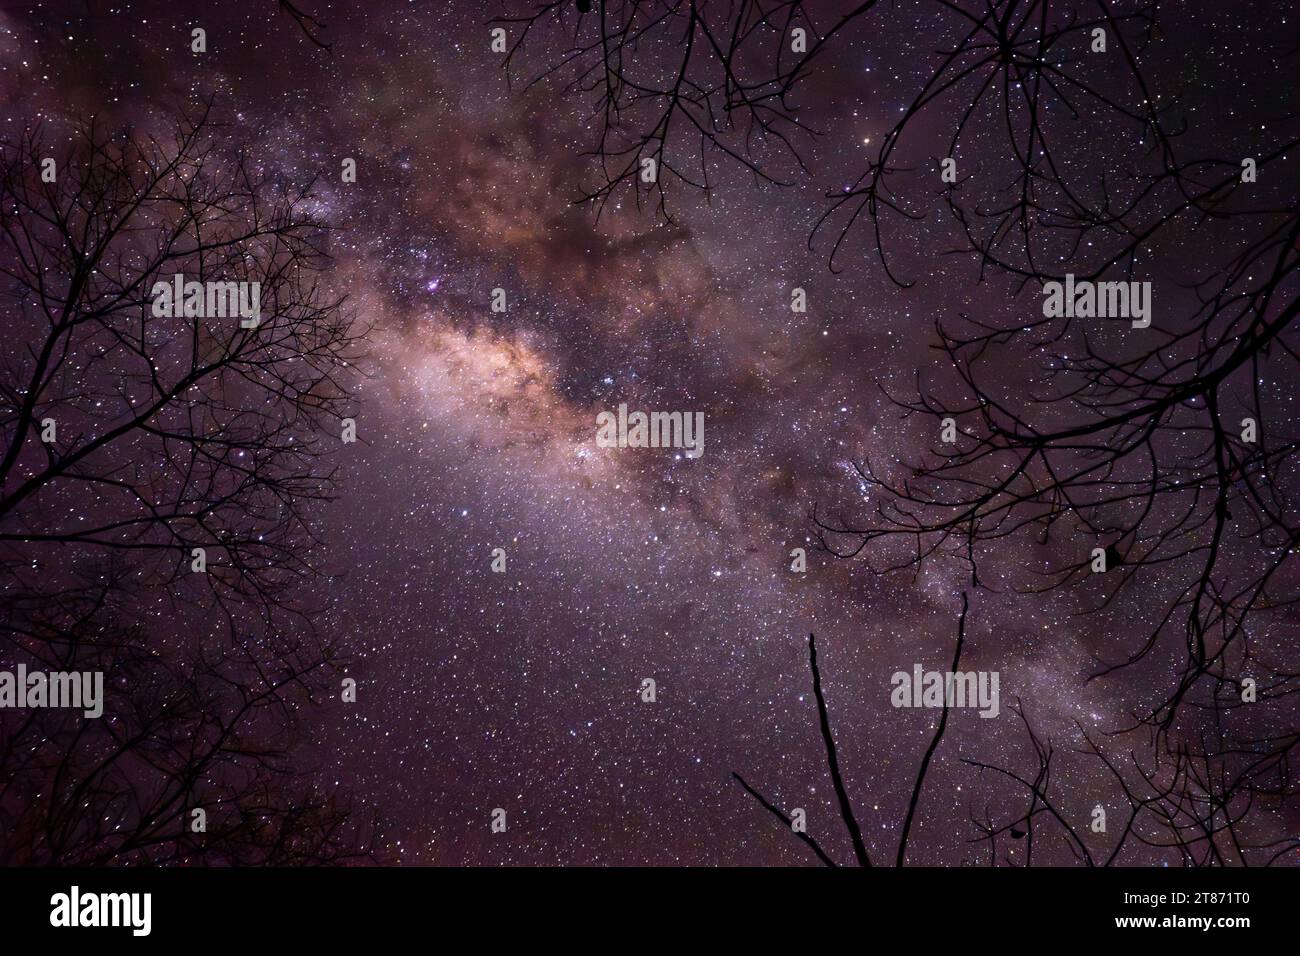 Pictures serie of the starry night over the Amazon Forest in Mato Grosso, Brazil. Look at the pictures in succession to see the movement of the stars. Stock Photo